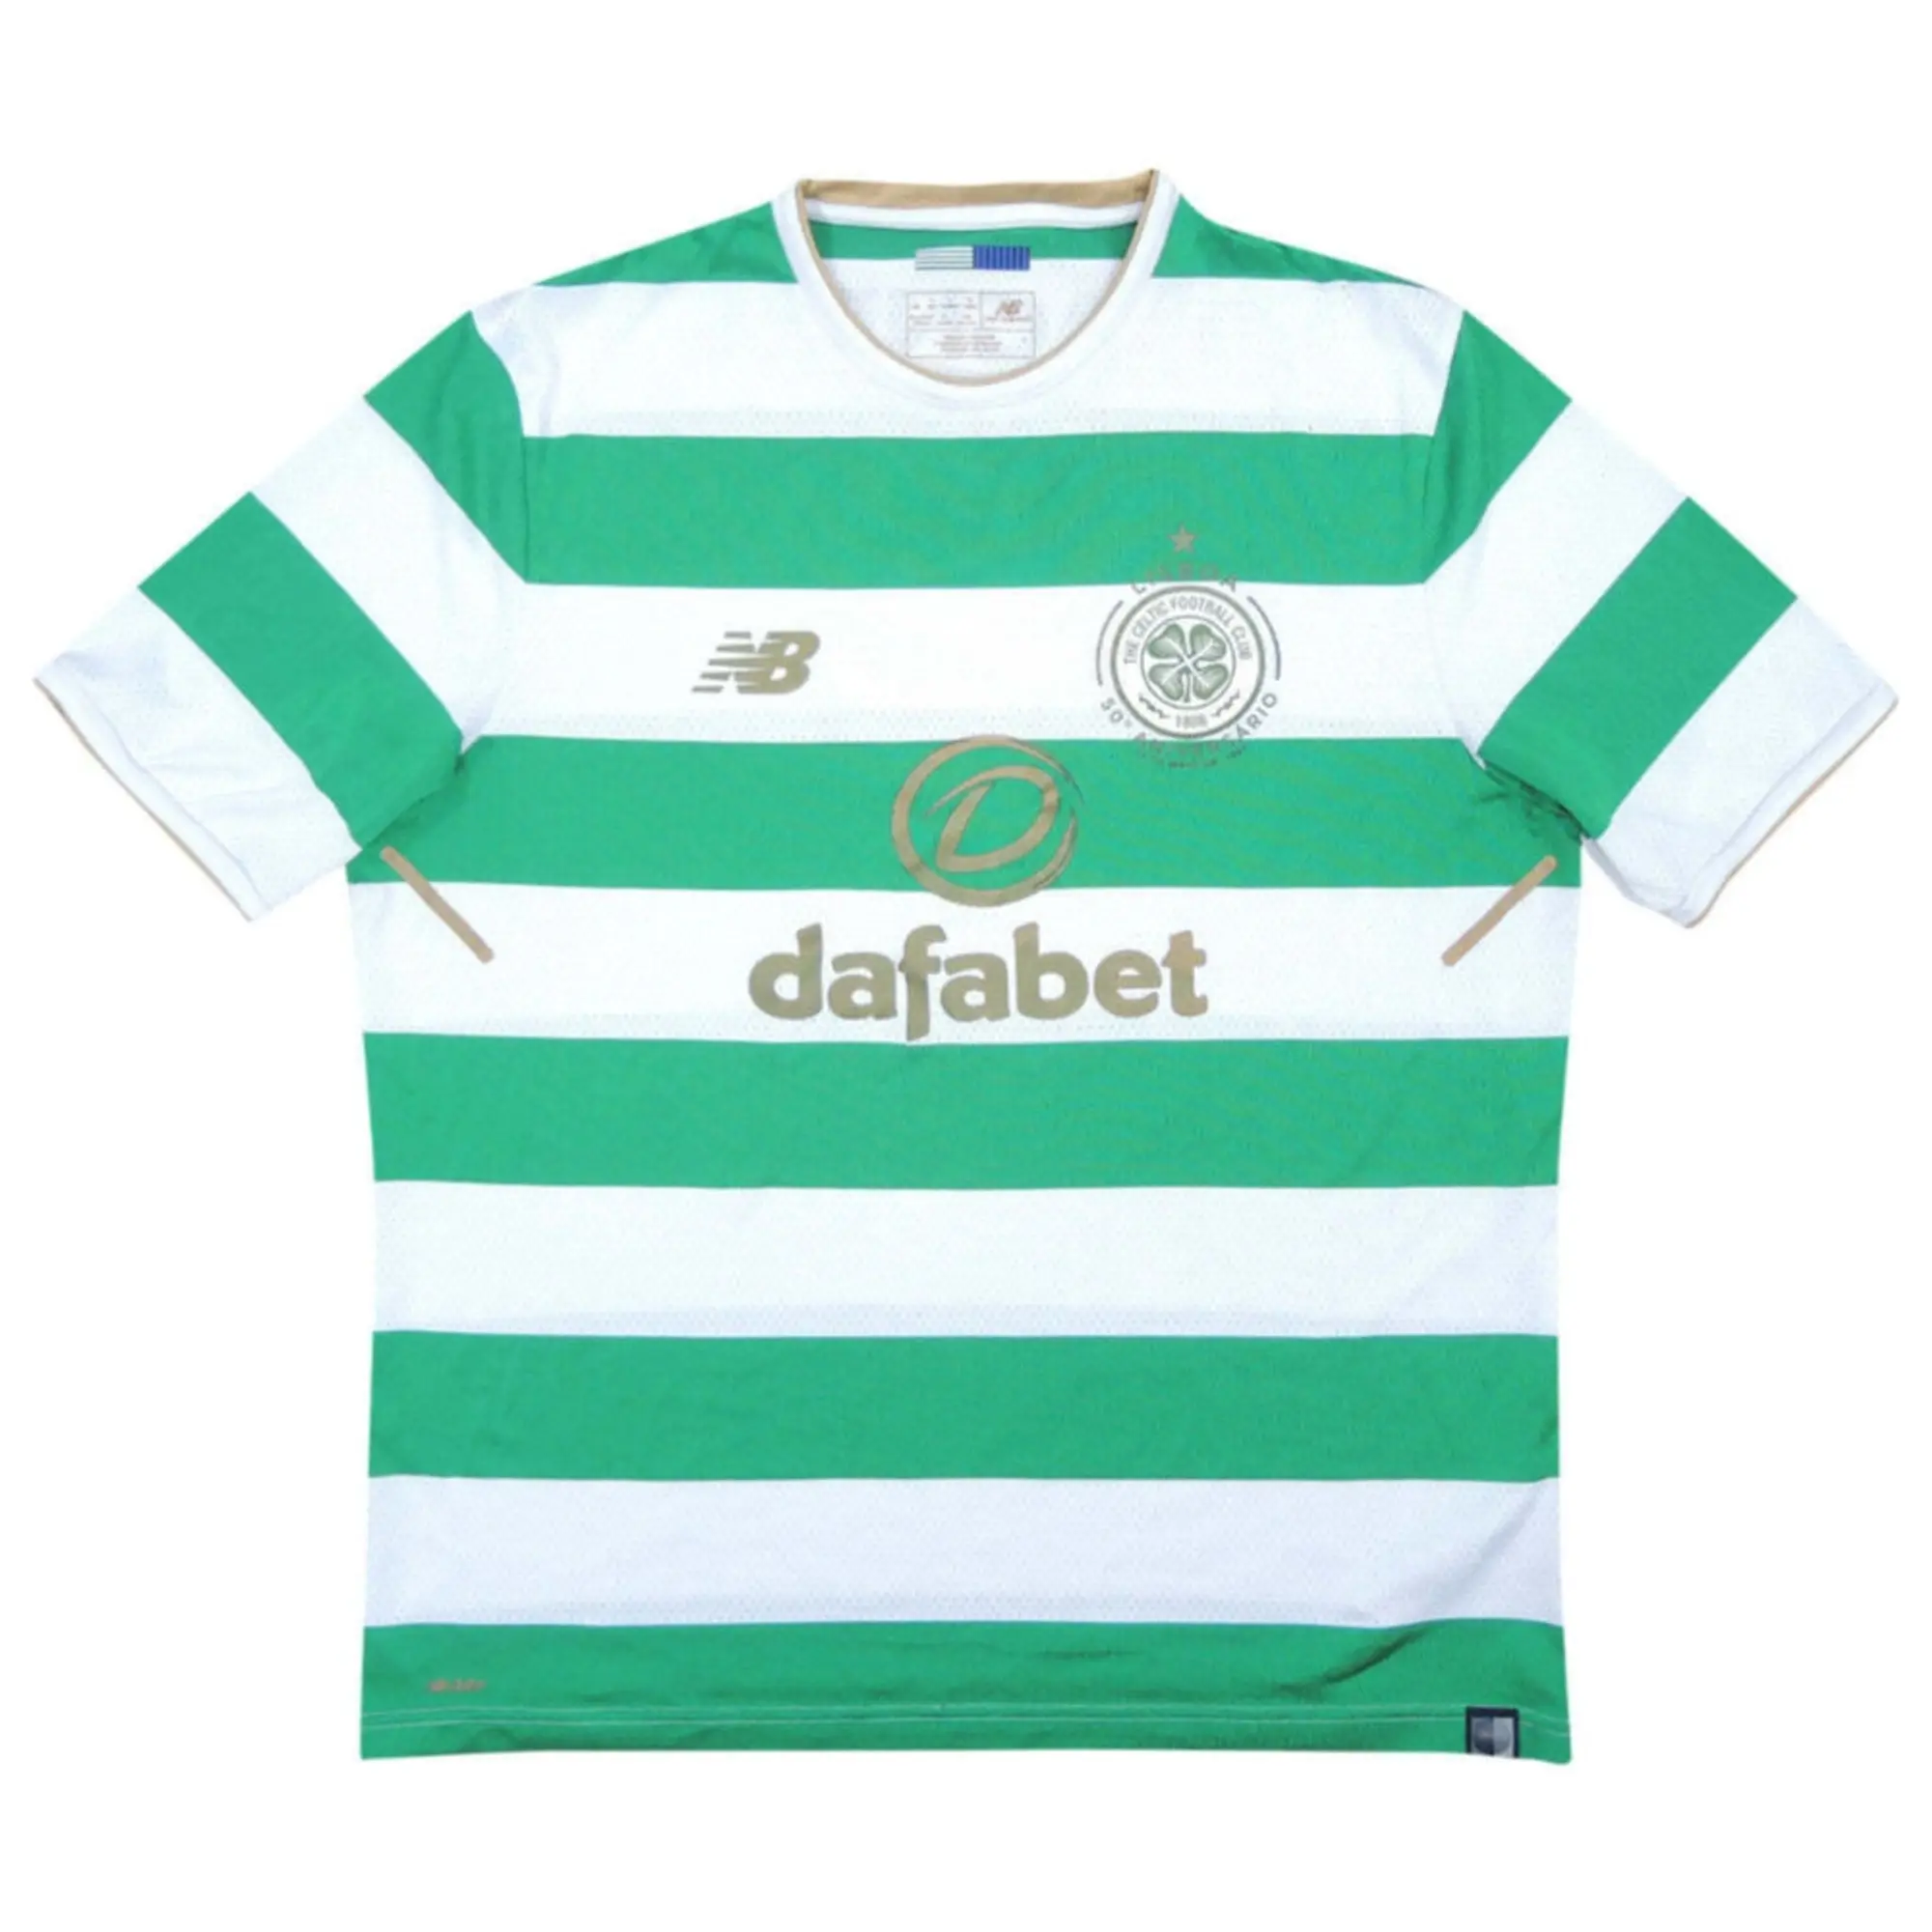 Celtic have fresh hoops for the future as New Balance kit deal is